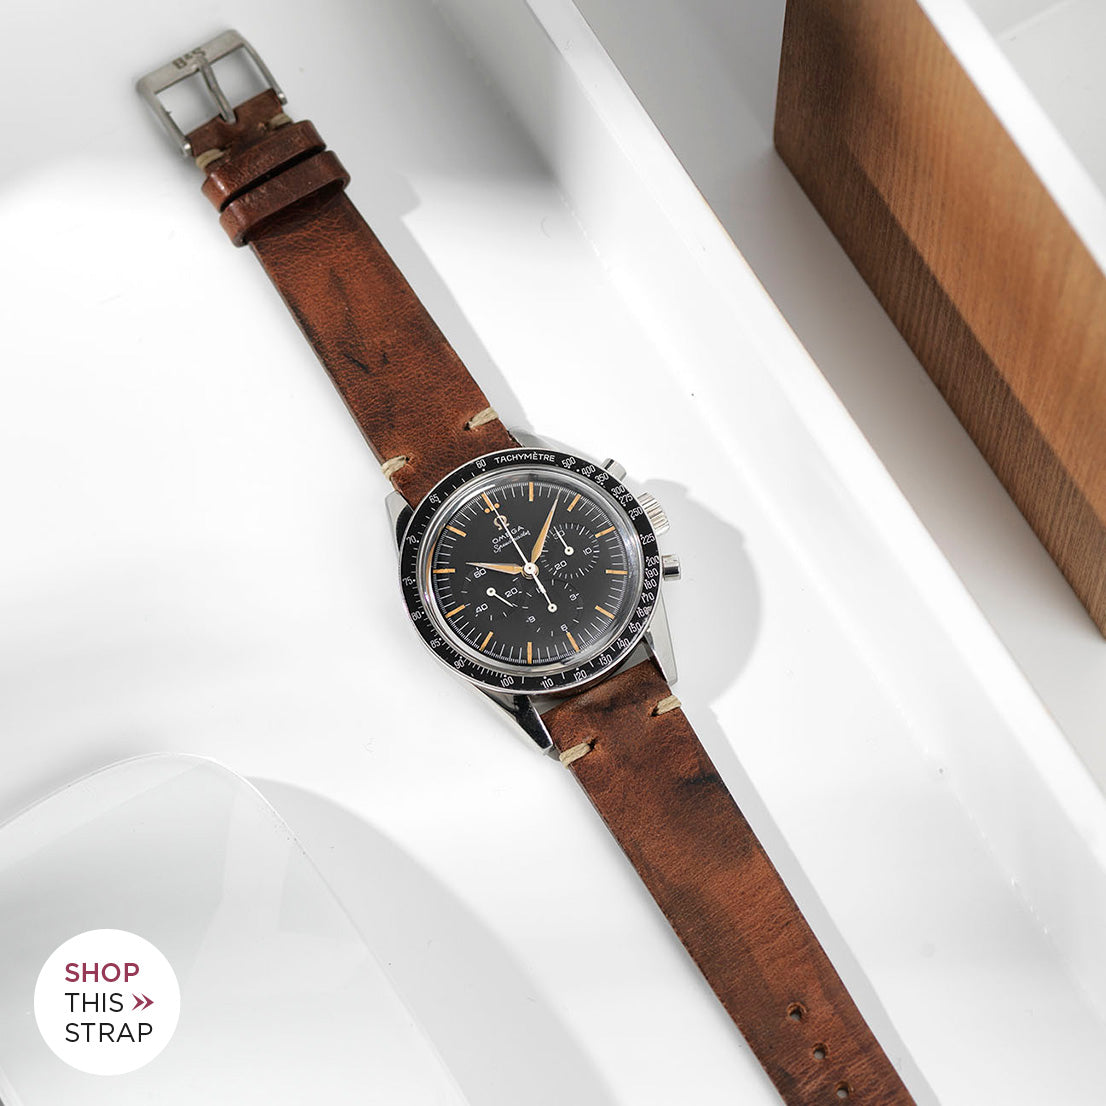 Bulang and Sons_Strap Guide_The Omega Straight Lugs speedmaster_Siena Brown Leather Watch Strap